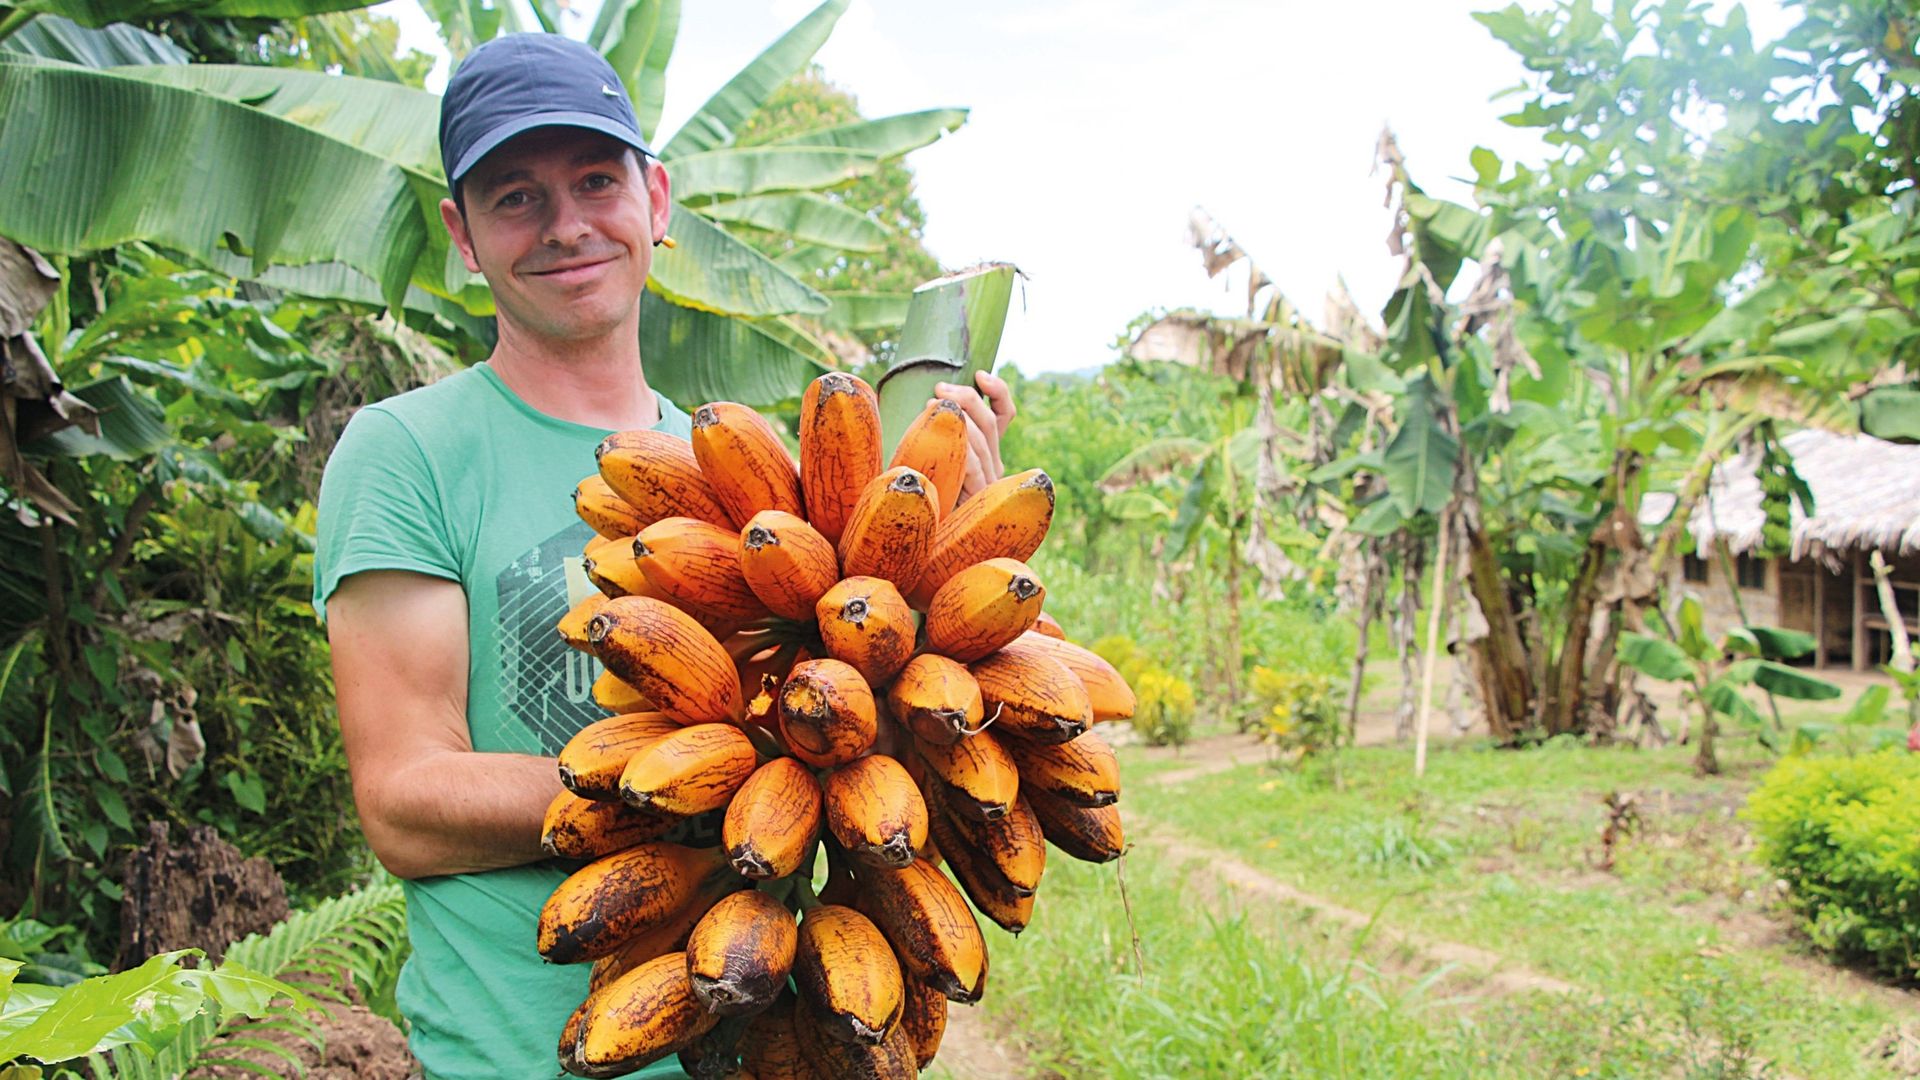 We must save the edible banana.  Belgian researchers in Australia are looking for solutions